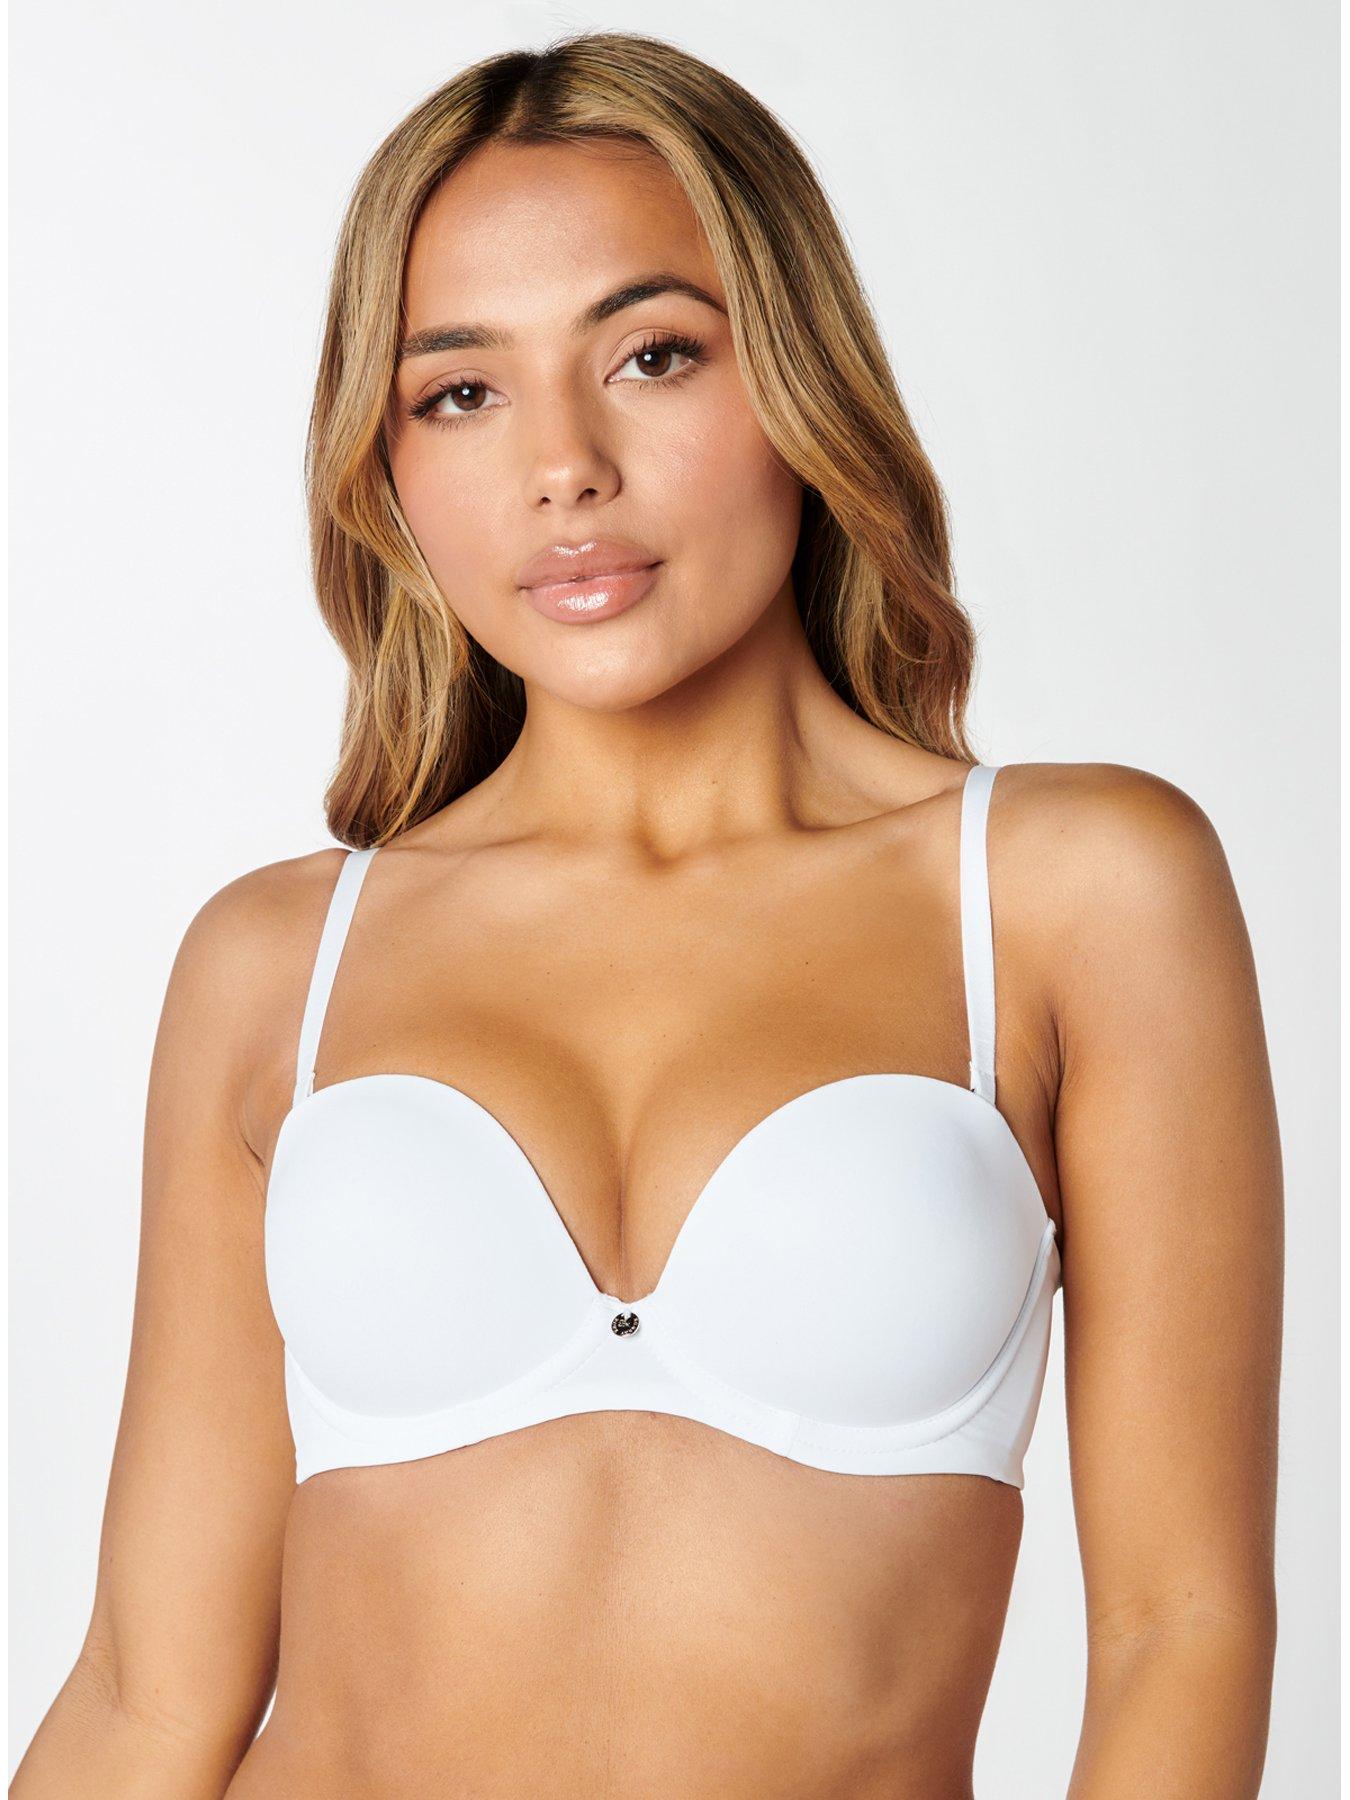 Underwire in 30B Bra Size B Cup Sizes Contour and Plunge Bras